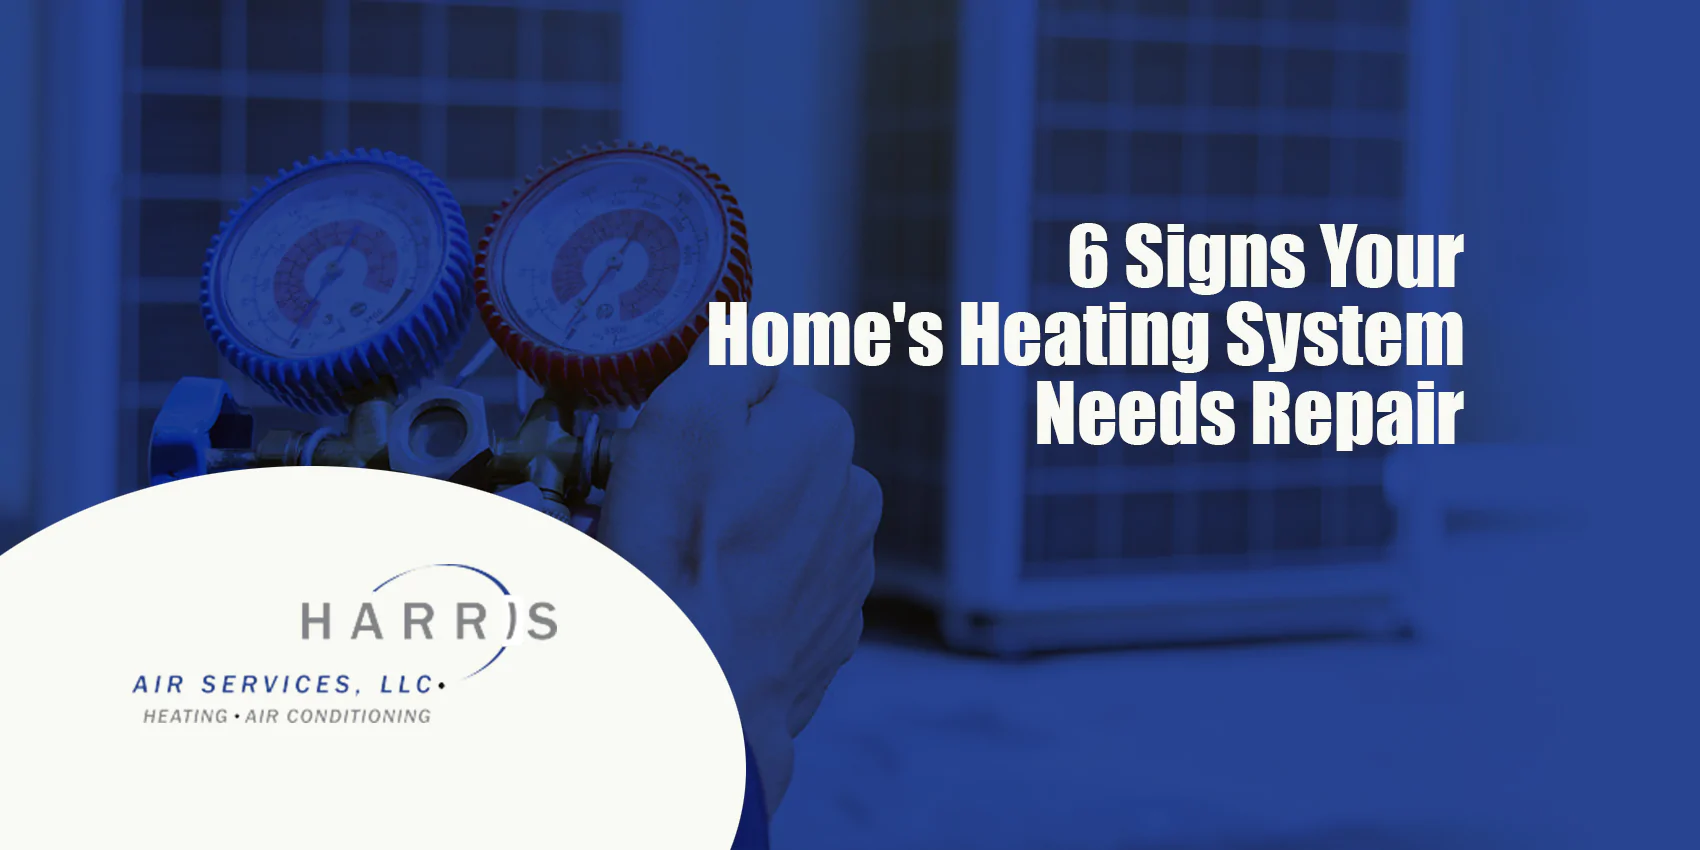 6 Signs Your Home's Heating System Needs Repair